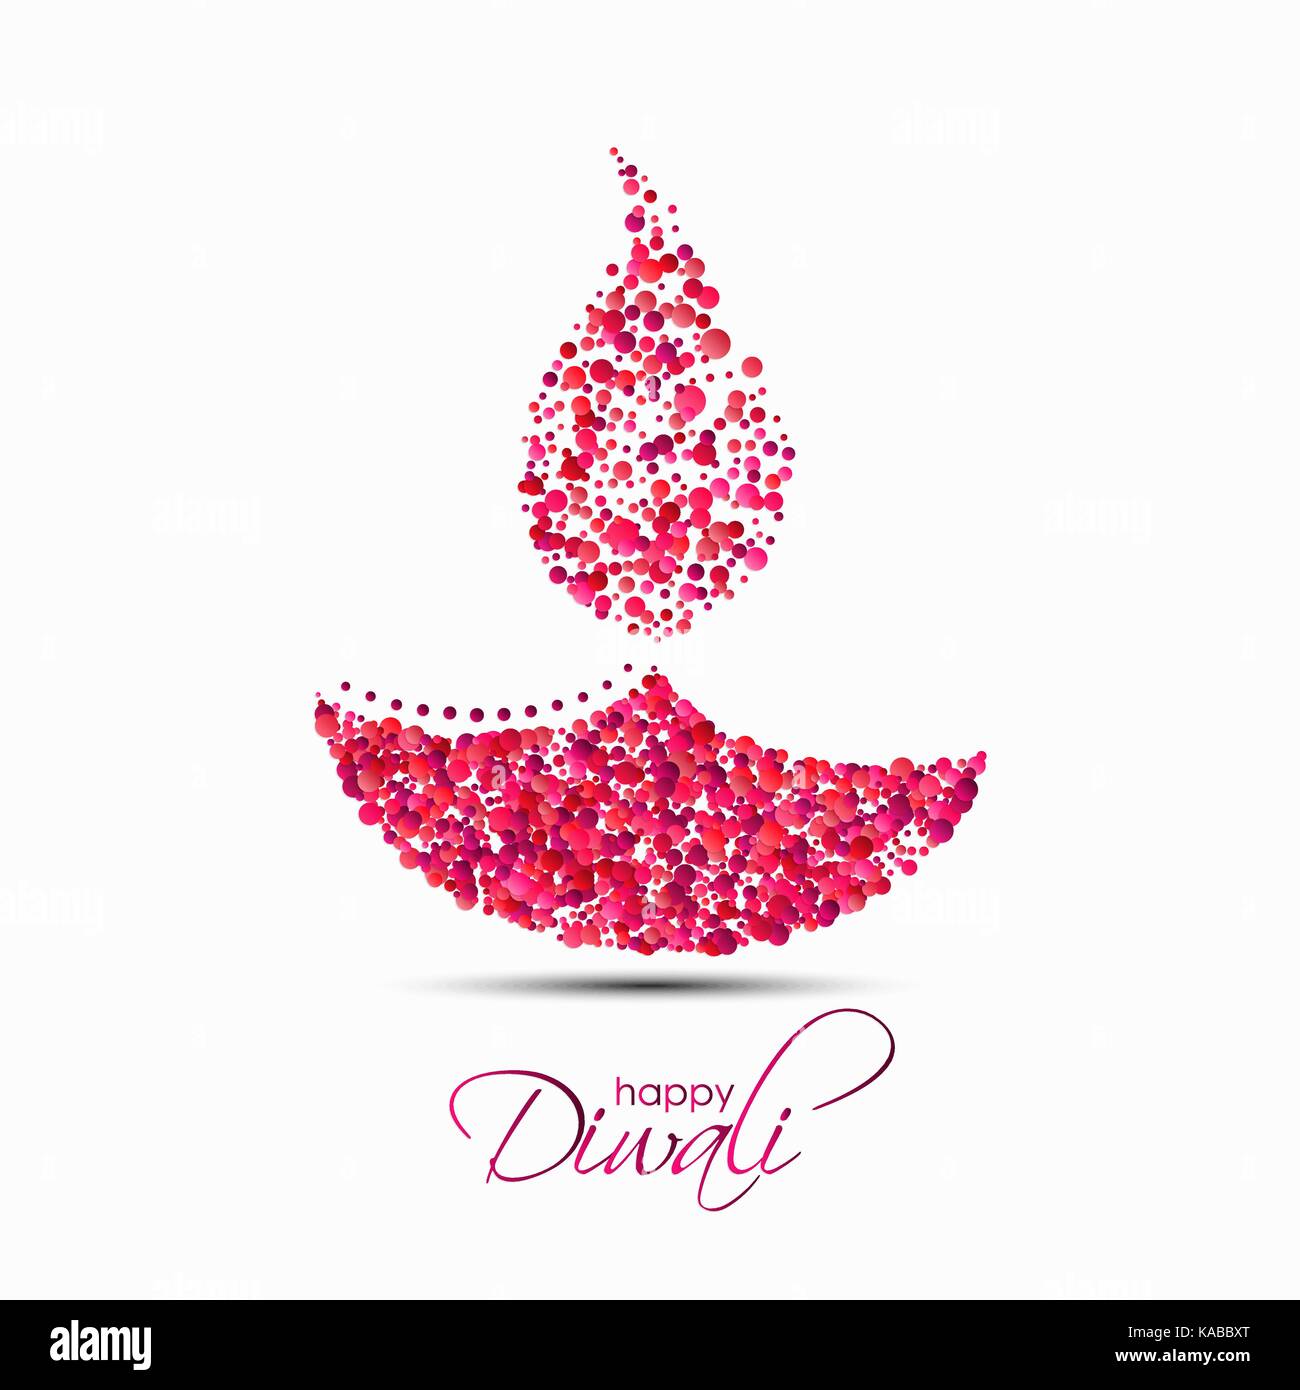 Happy Diwali. The festival of lights. Vector illustration of abstract Indian diya oil lamp made of round confetti for your greeting card design Stock Vector